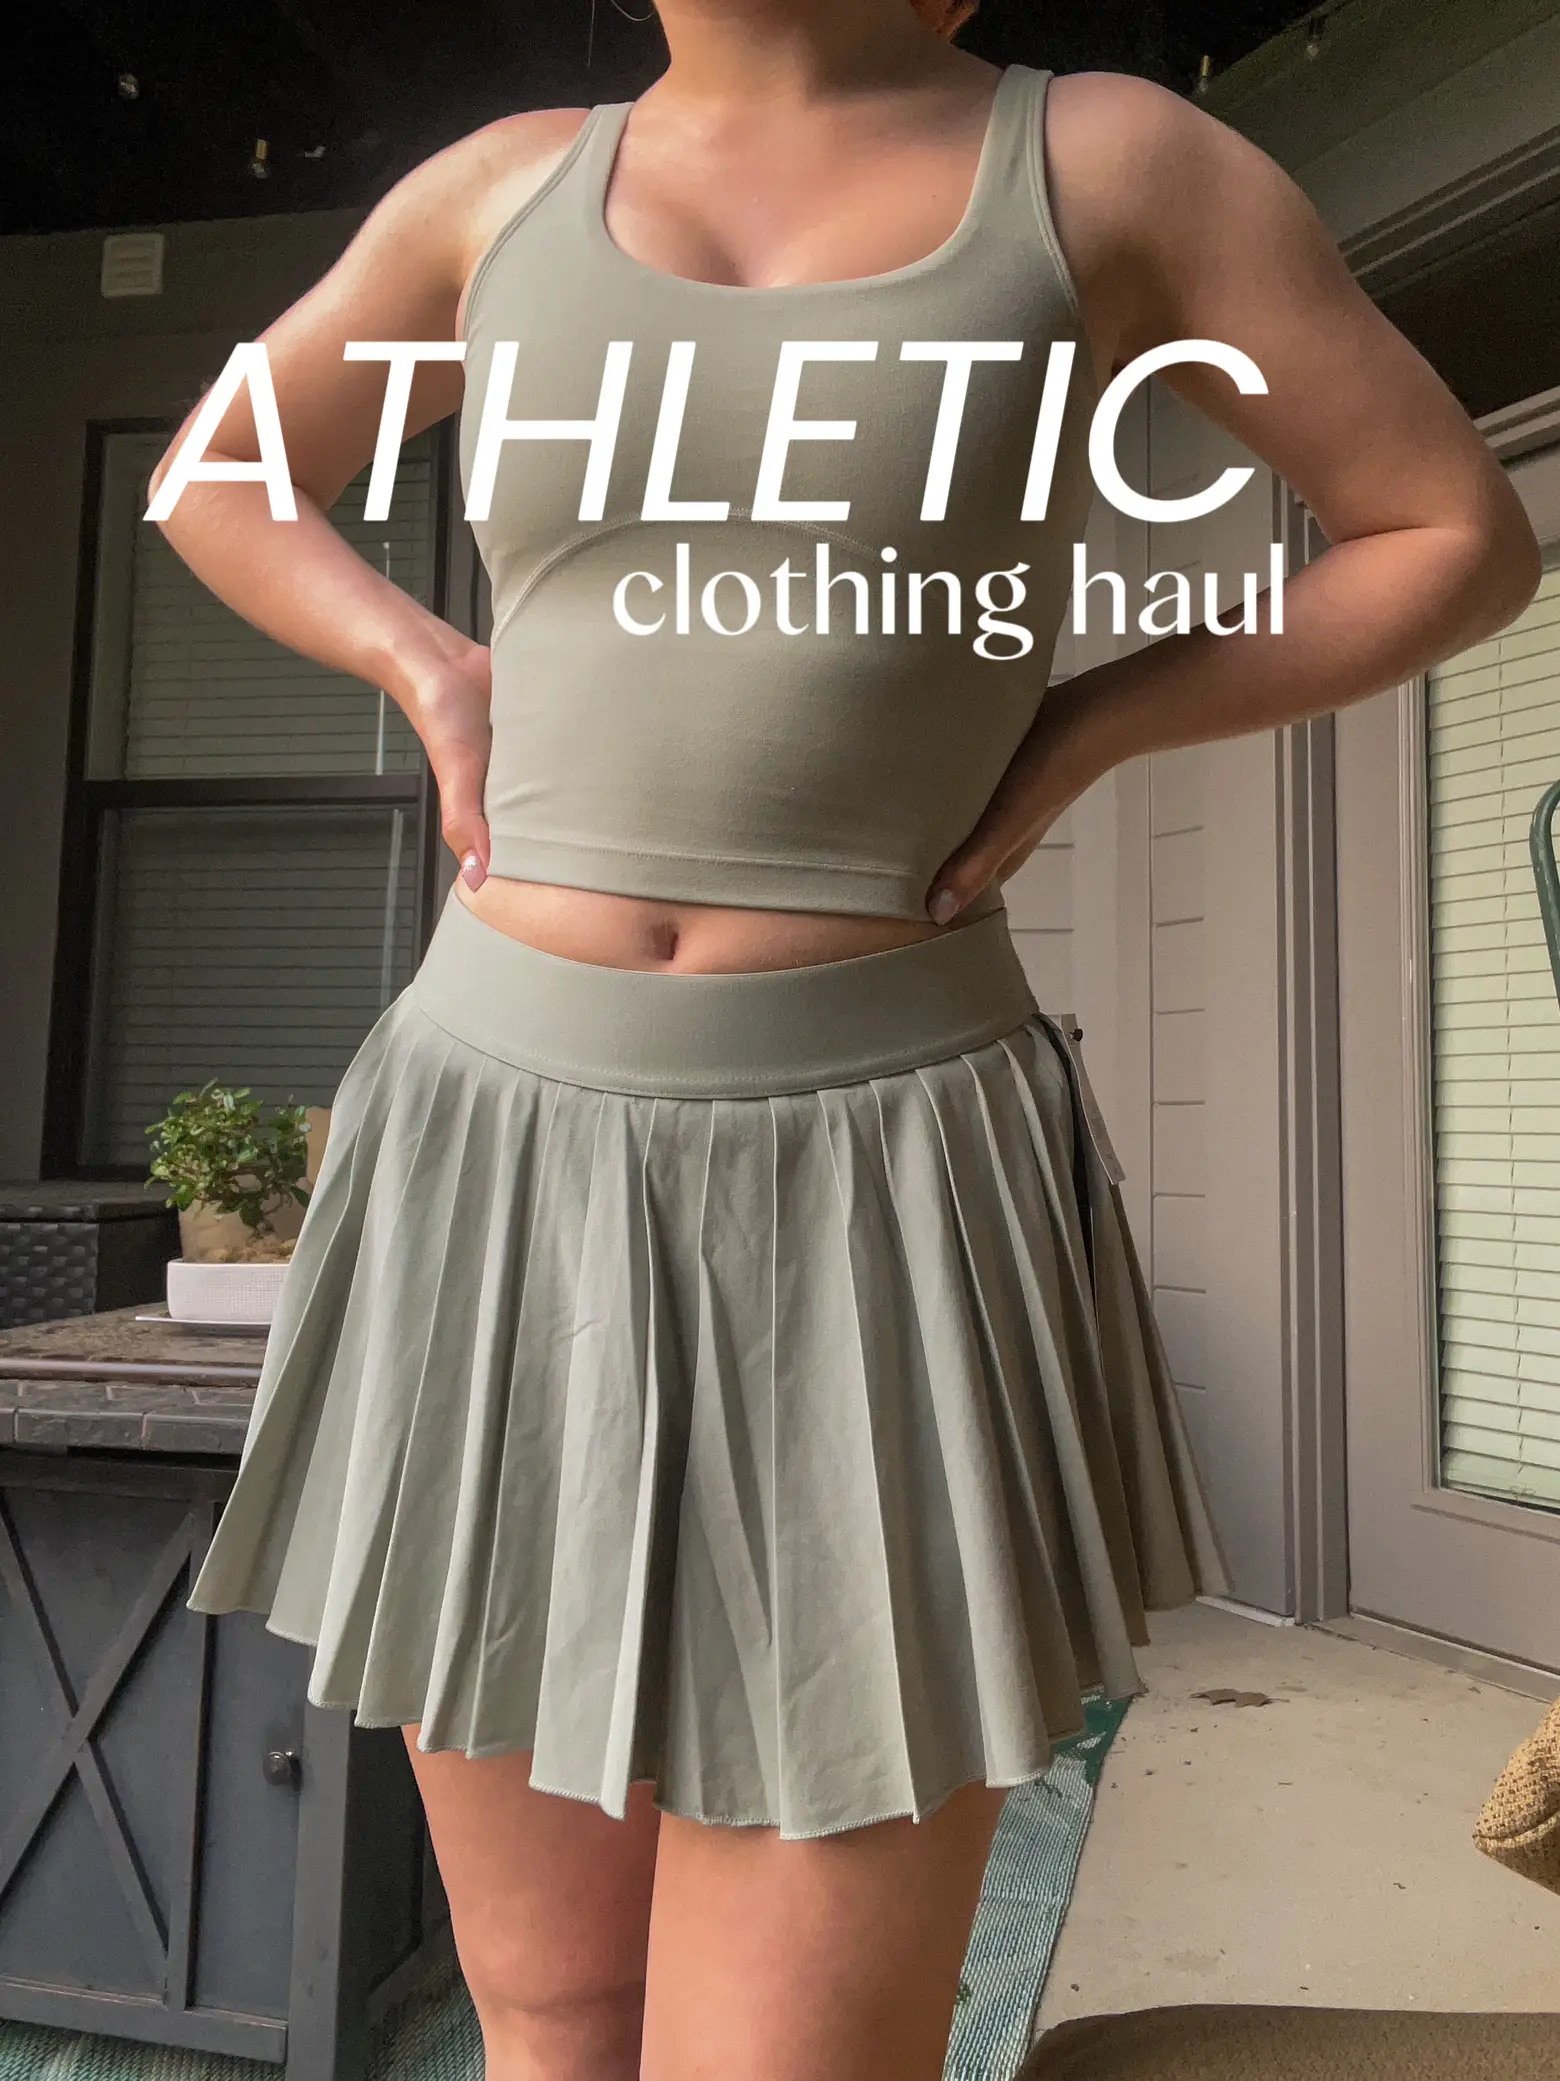 ATHLETIC CLOTHING HAUL, Gallery posted by Emily Zigo